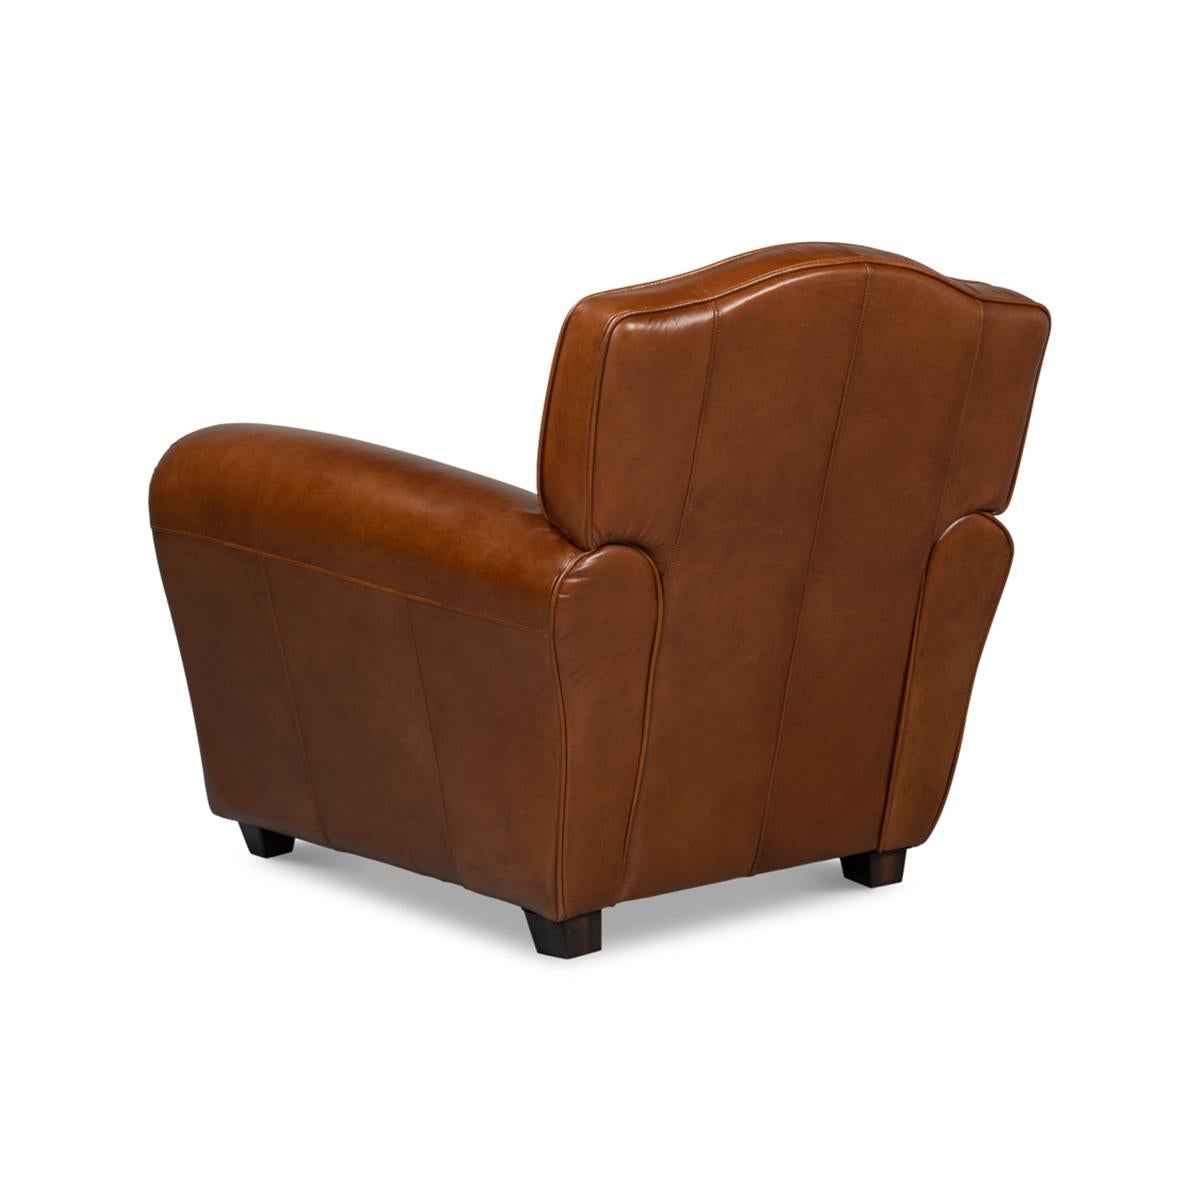 Contemporary French Art Deco Style Club Chair For Sale